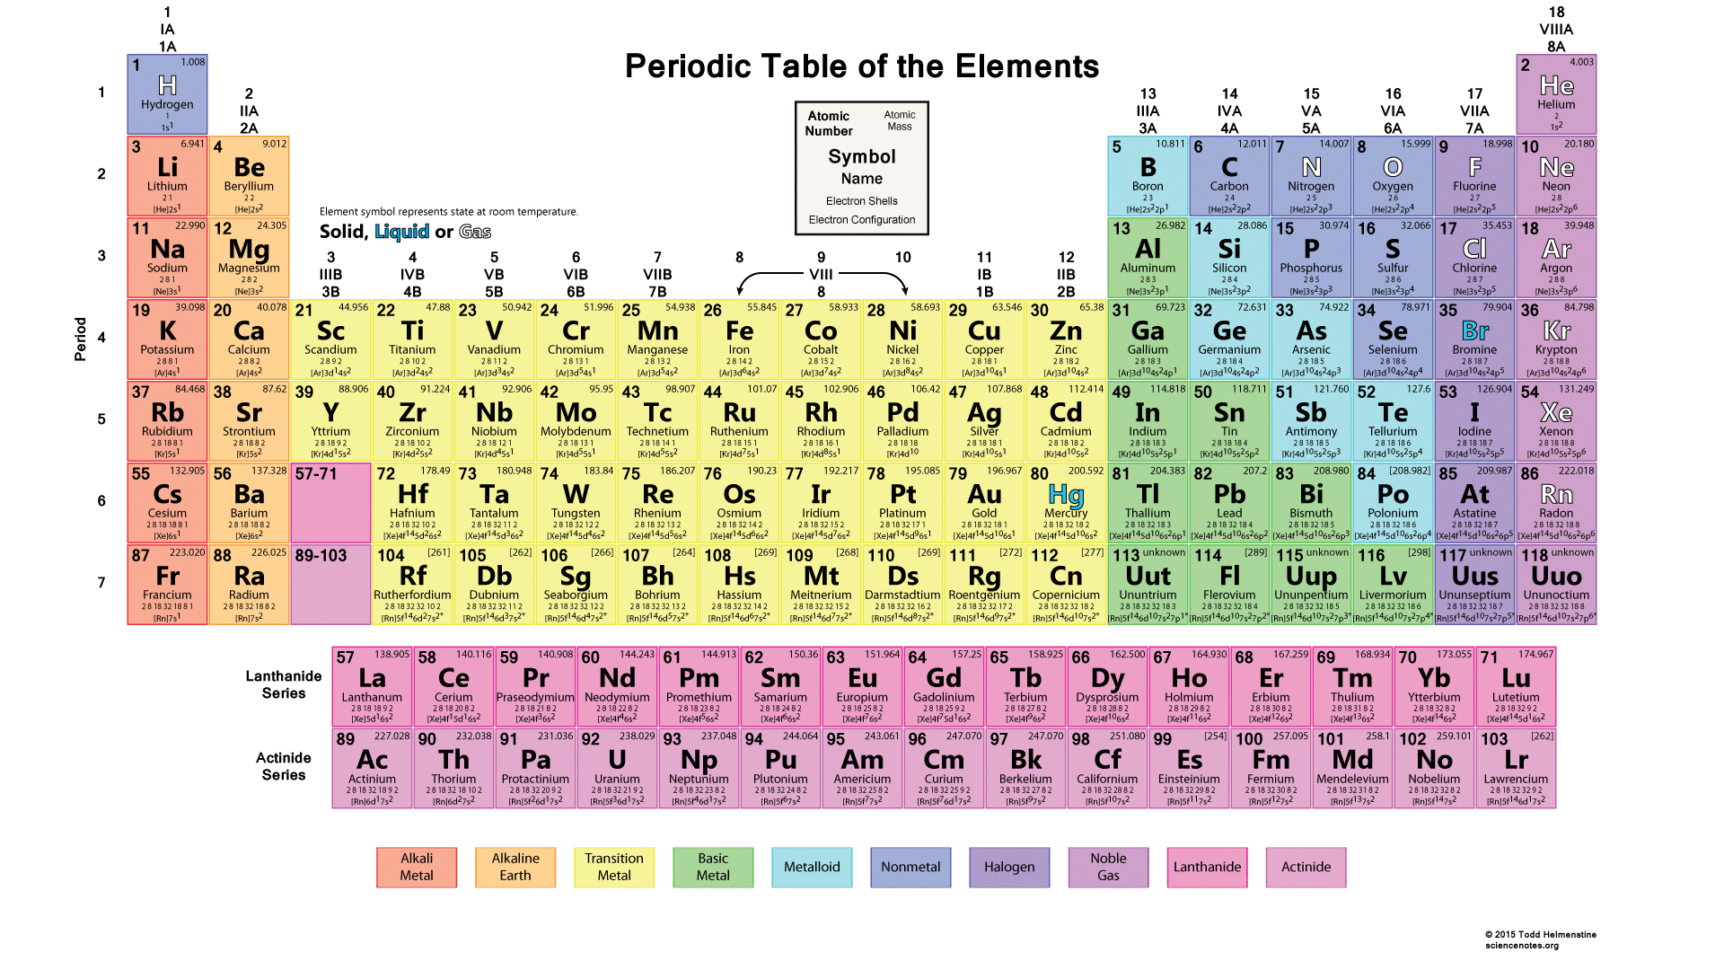 color coded labeled periodic table